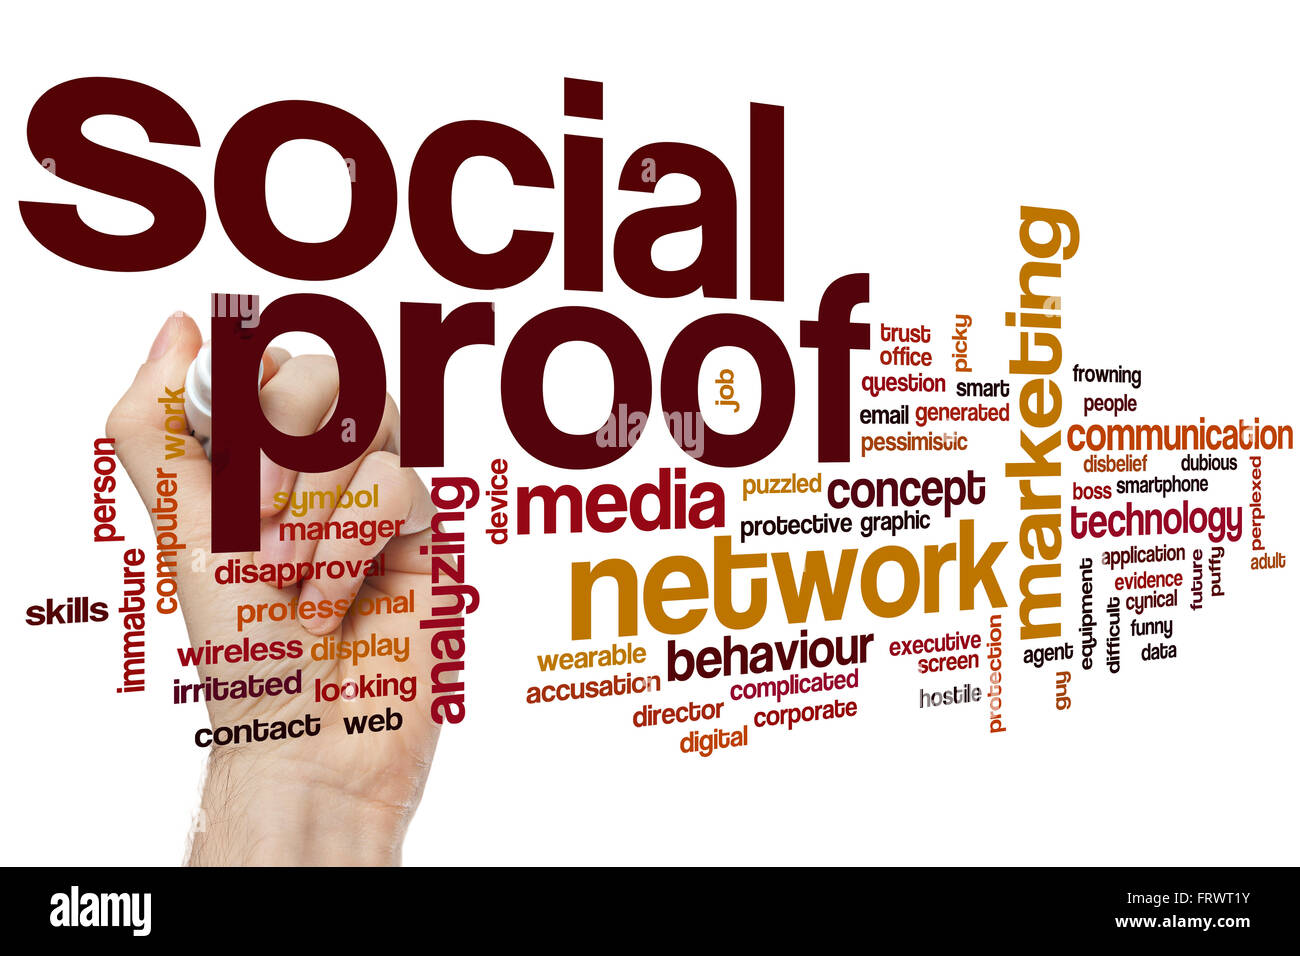 Social proof word cloud concept with network media related tags Stock Photo